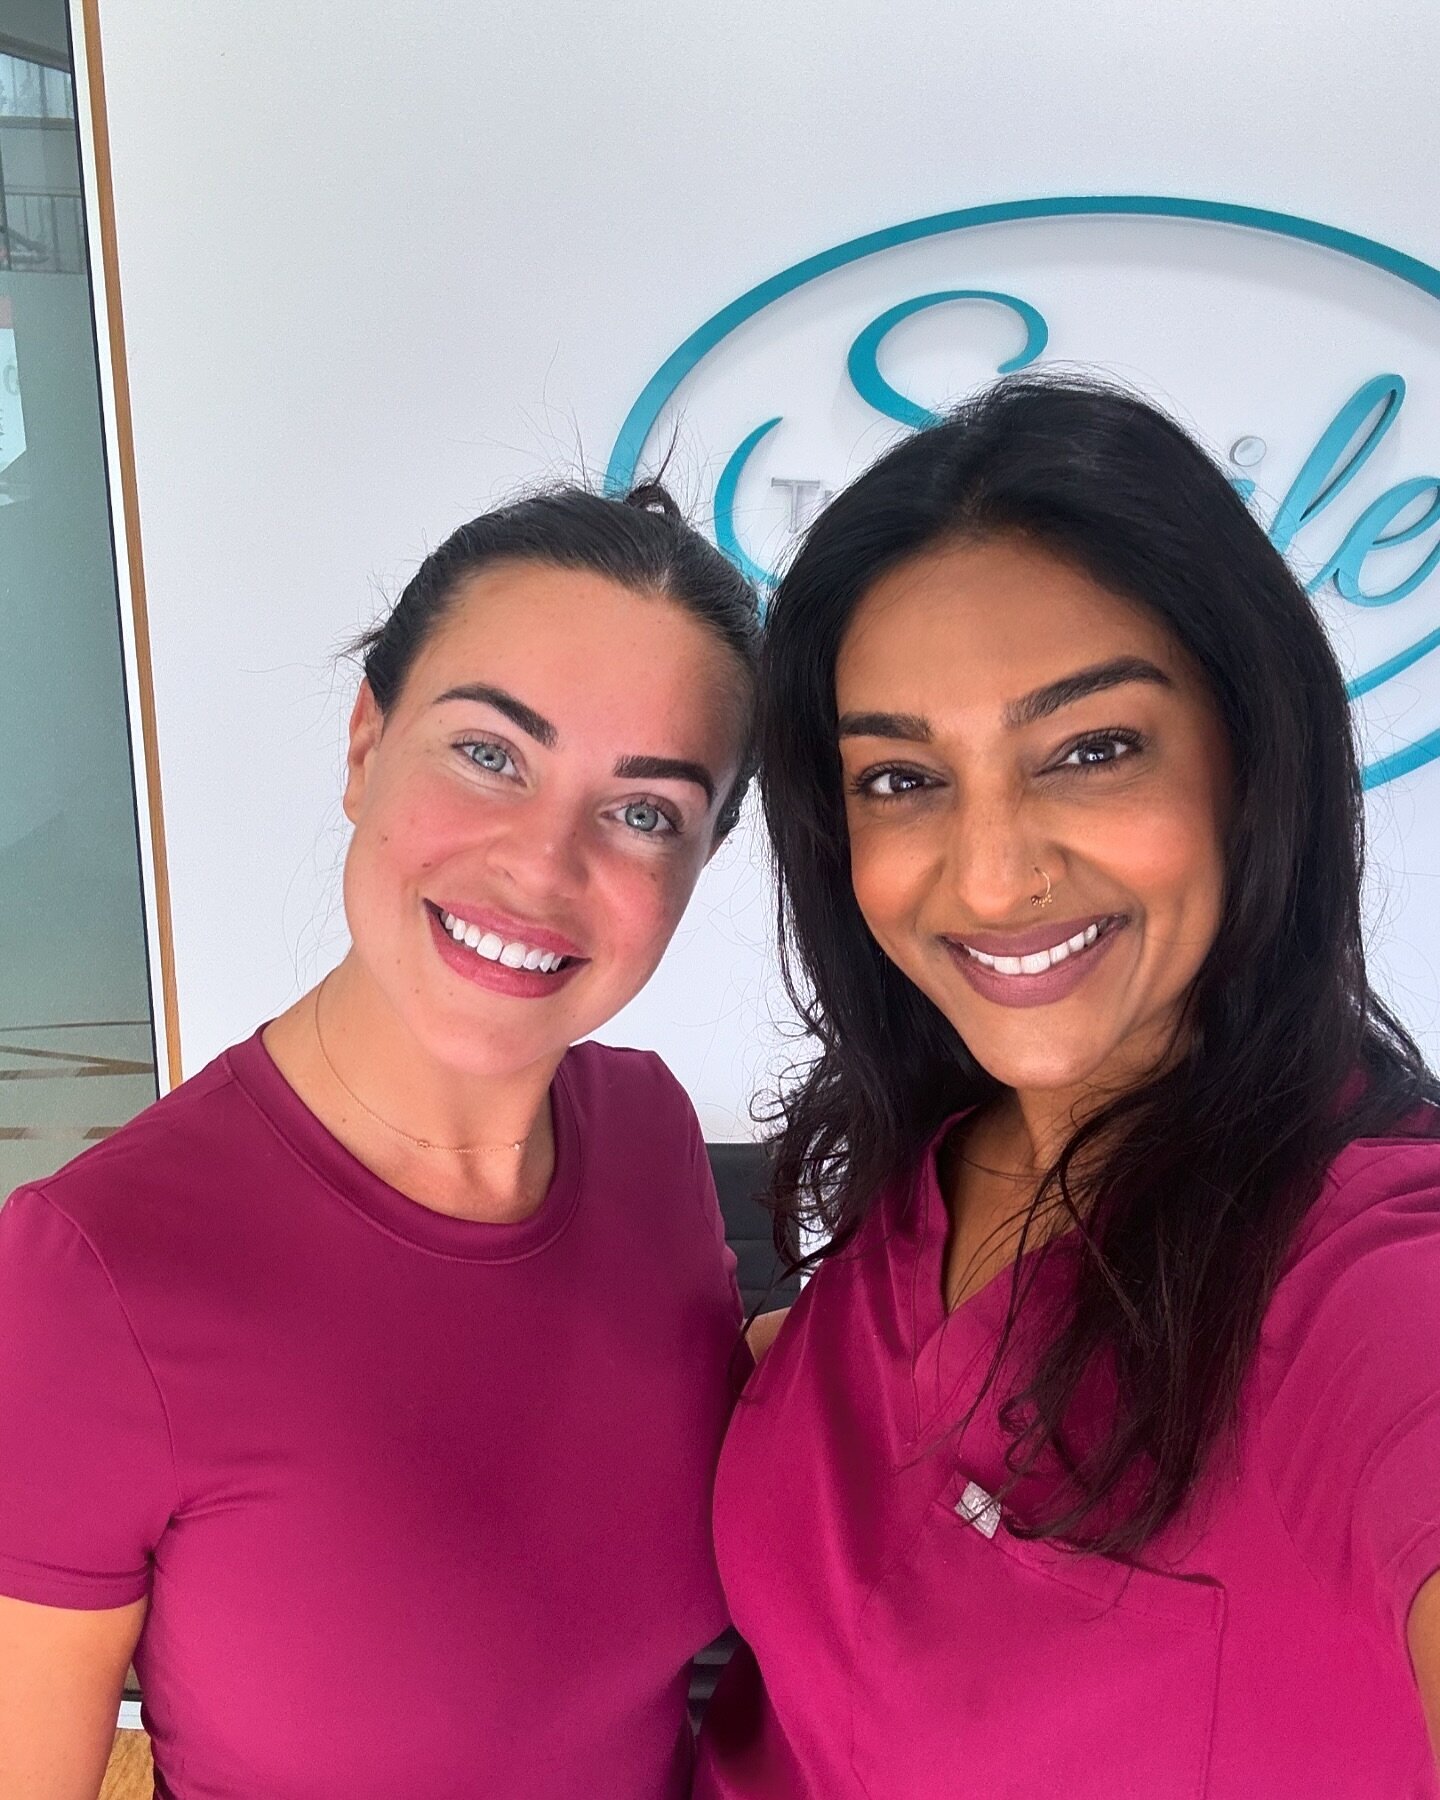 A little teeth love for @_bronteschofield at TSC ❤️
Thank you for choosing us! P.S how cute are our matchy matchy fits? 😂
#thesmilecliniqueperth 

#mafsaustralia #mafsau #perthinfluencer #perthinfluencers #perthsmilemakeover #smilemakeover #smilemak